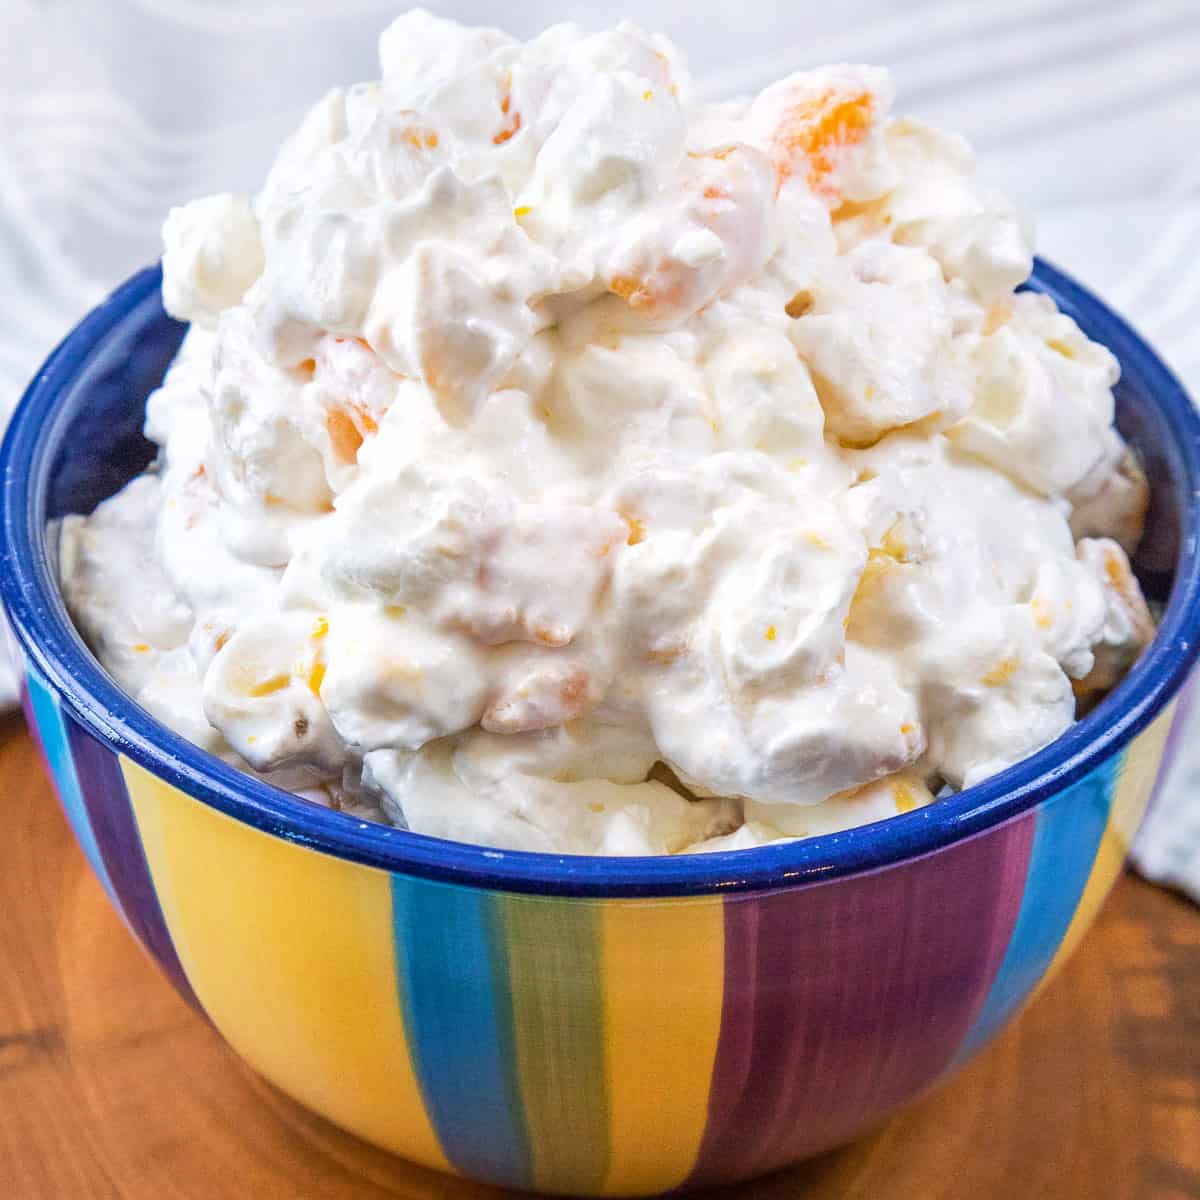 Old Fashioned Fruit Salad with Cool Whip (Ambrosia)